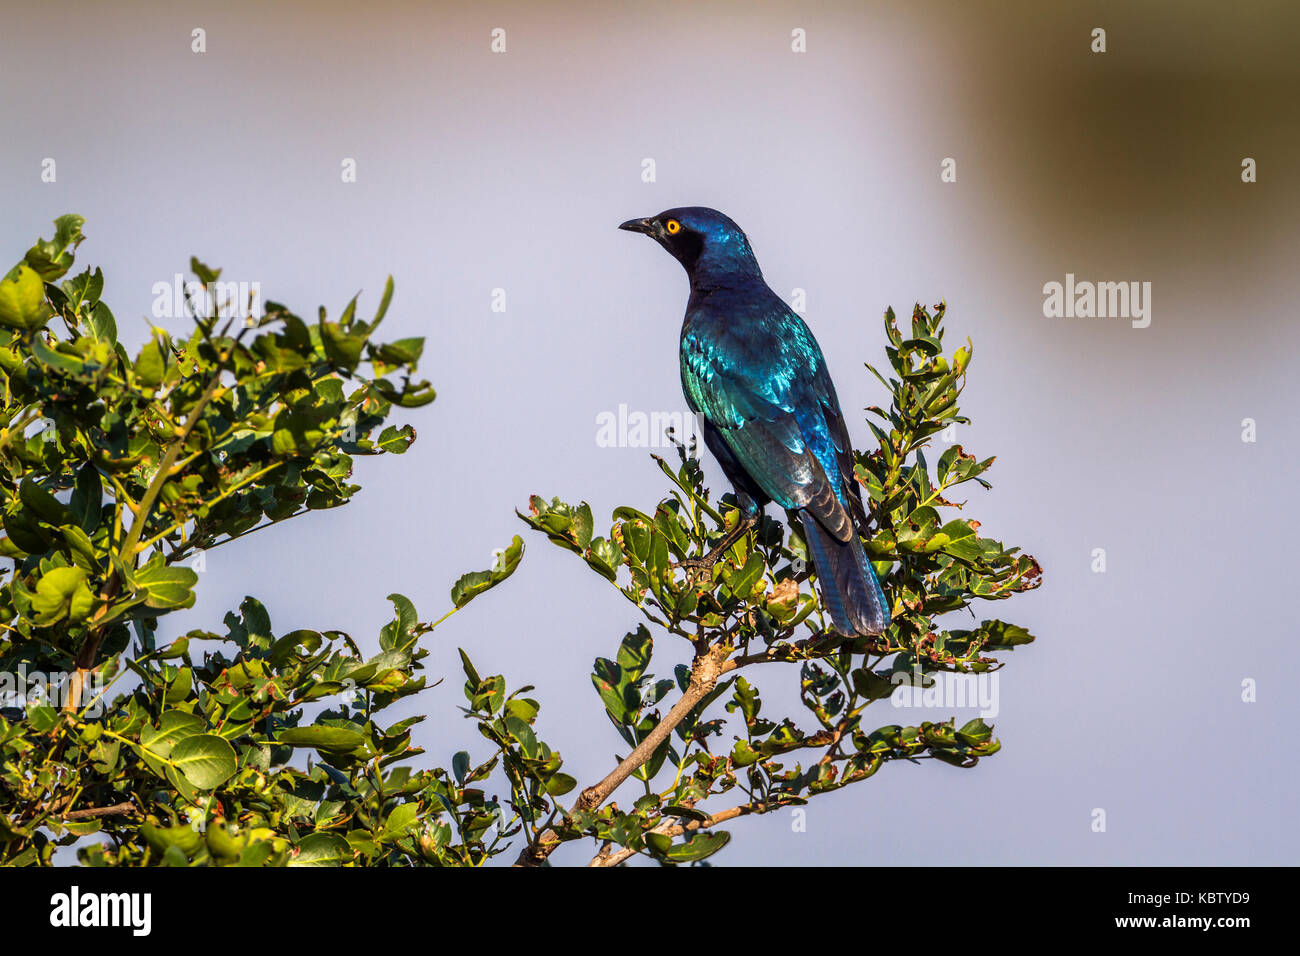 Greater blue-eared glossy-starling in Kruger national park, South Africa ; Specie Lamprotornis chalybaeus family of Sturnidae Stock Photo